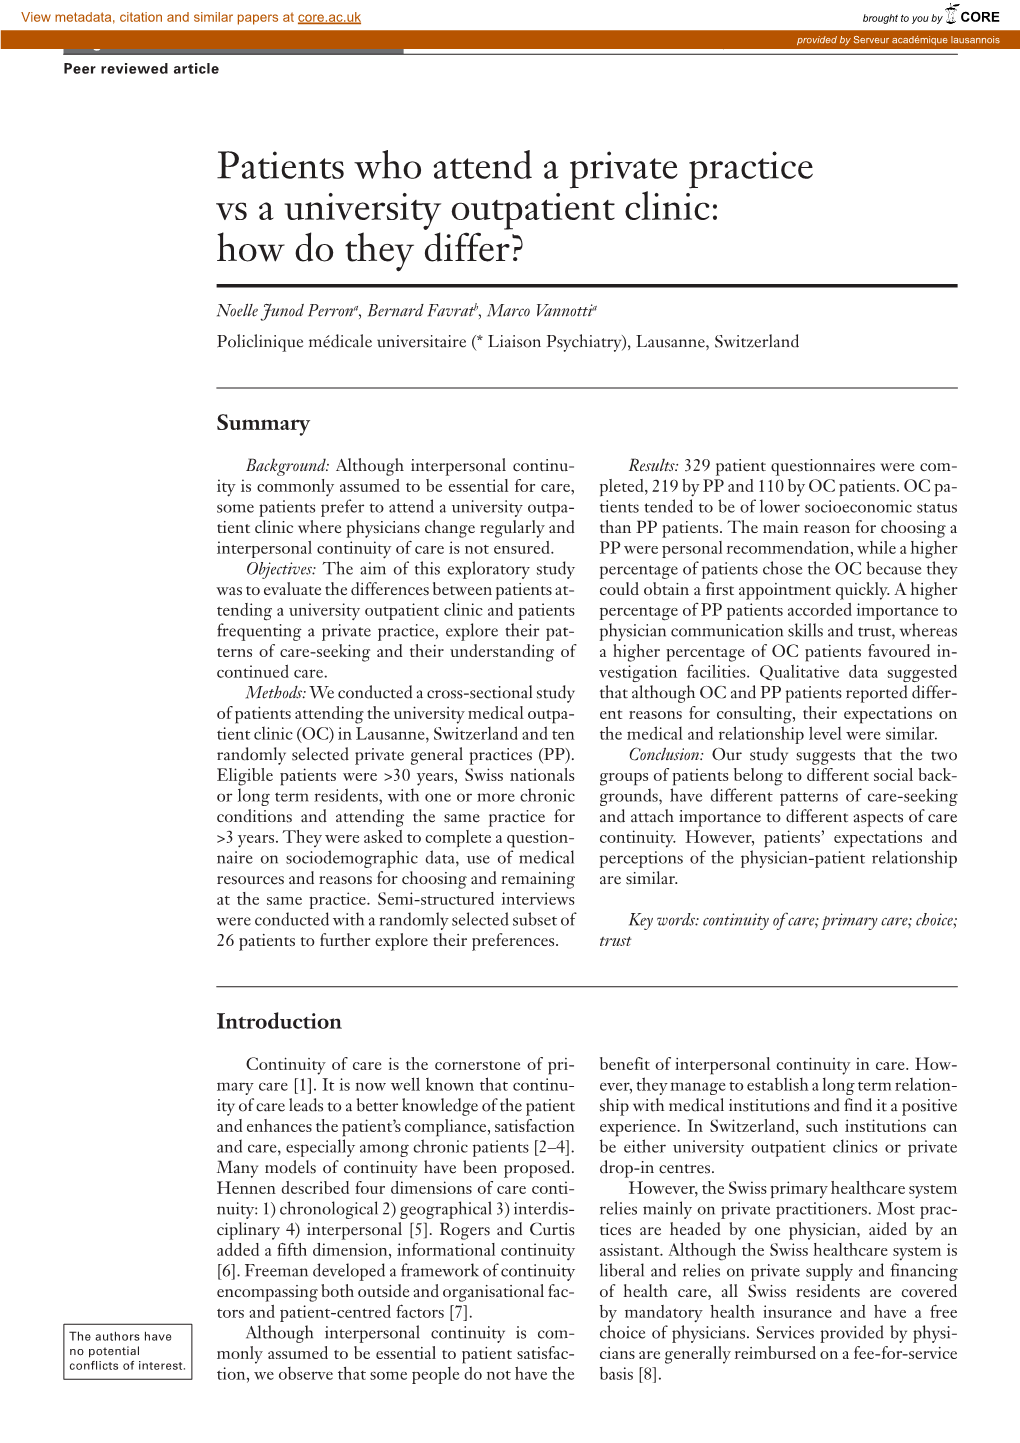 Patients Who Attend a Private Practice Vs a University Outpatient Clinic: How Do They Differ?